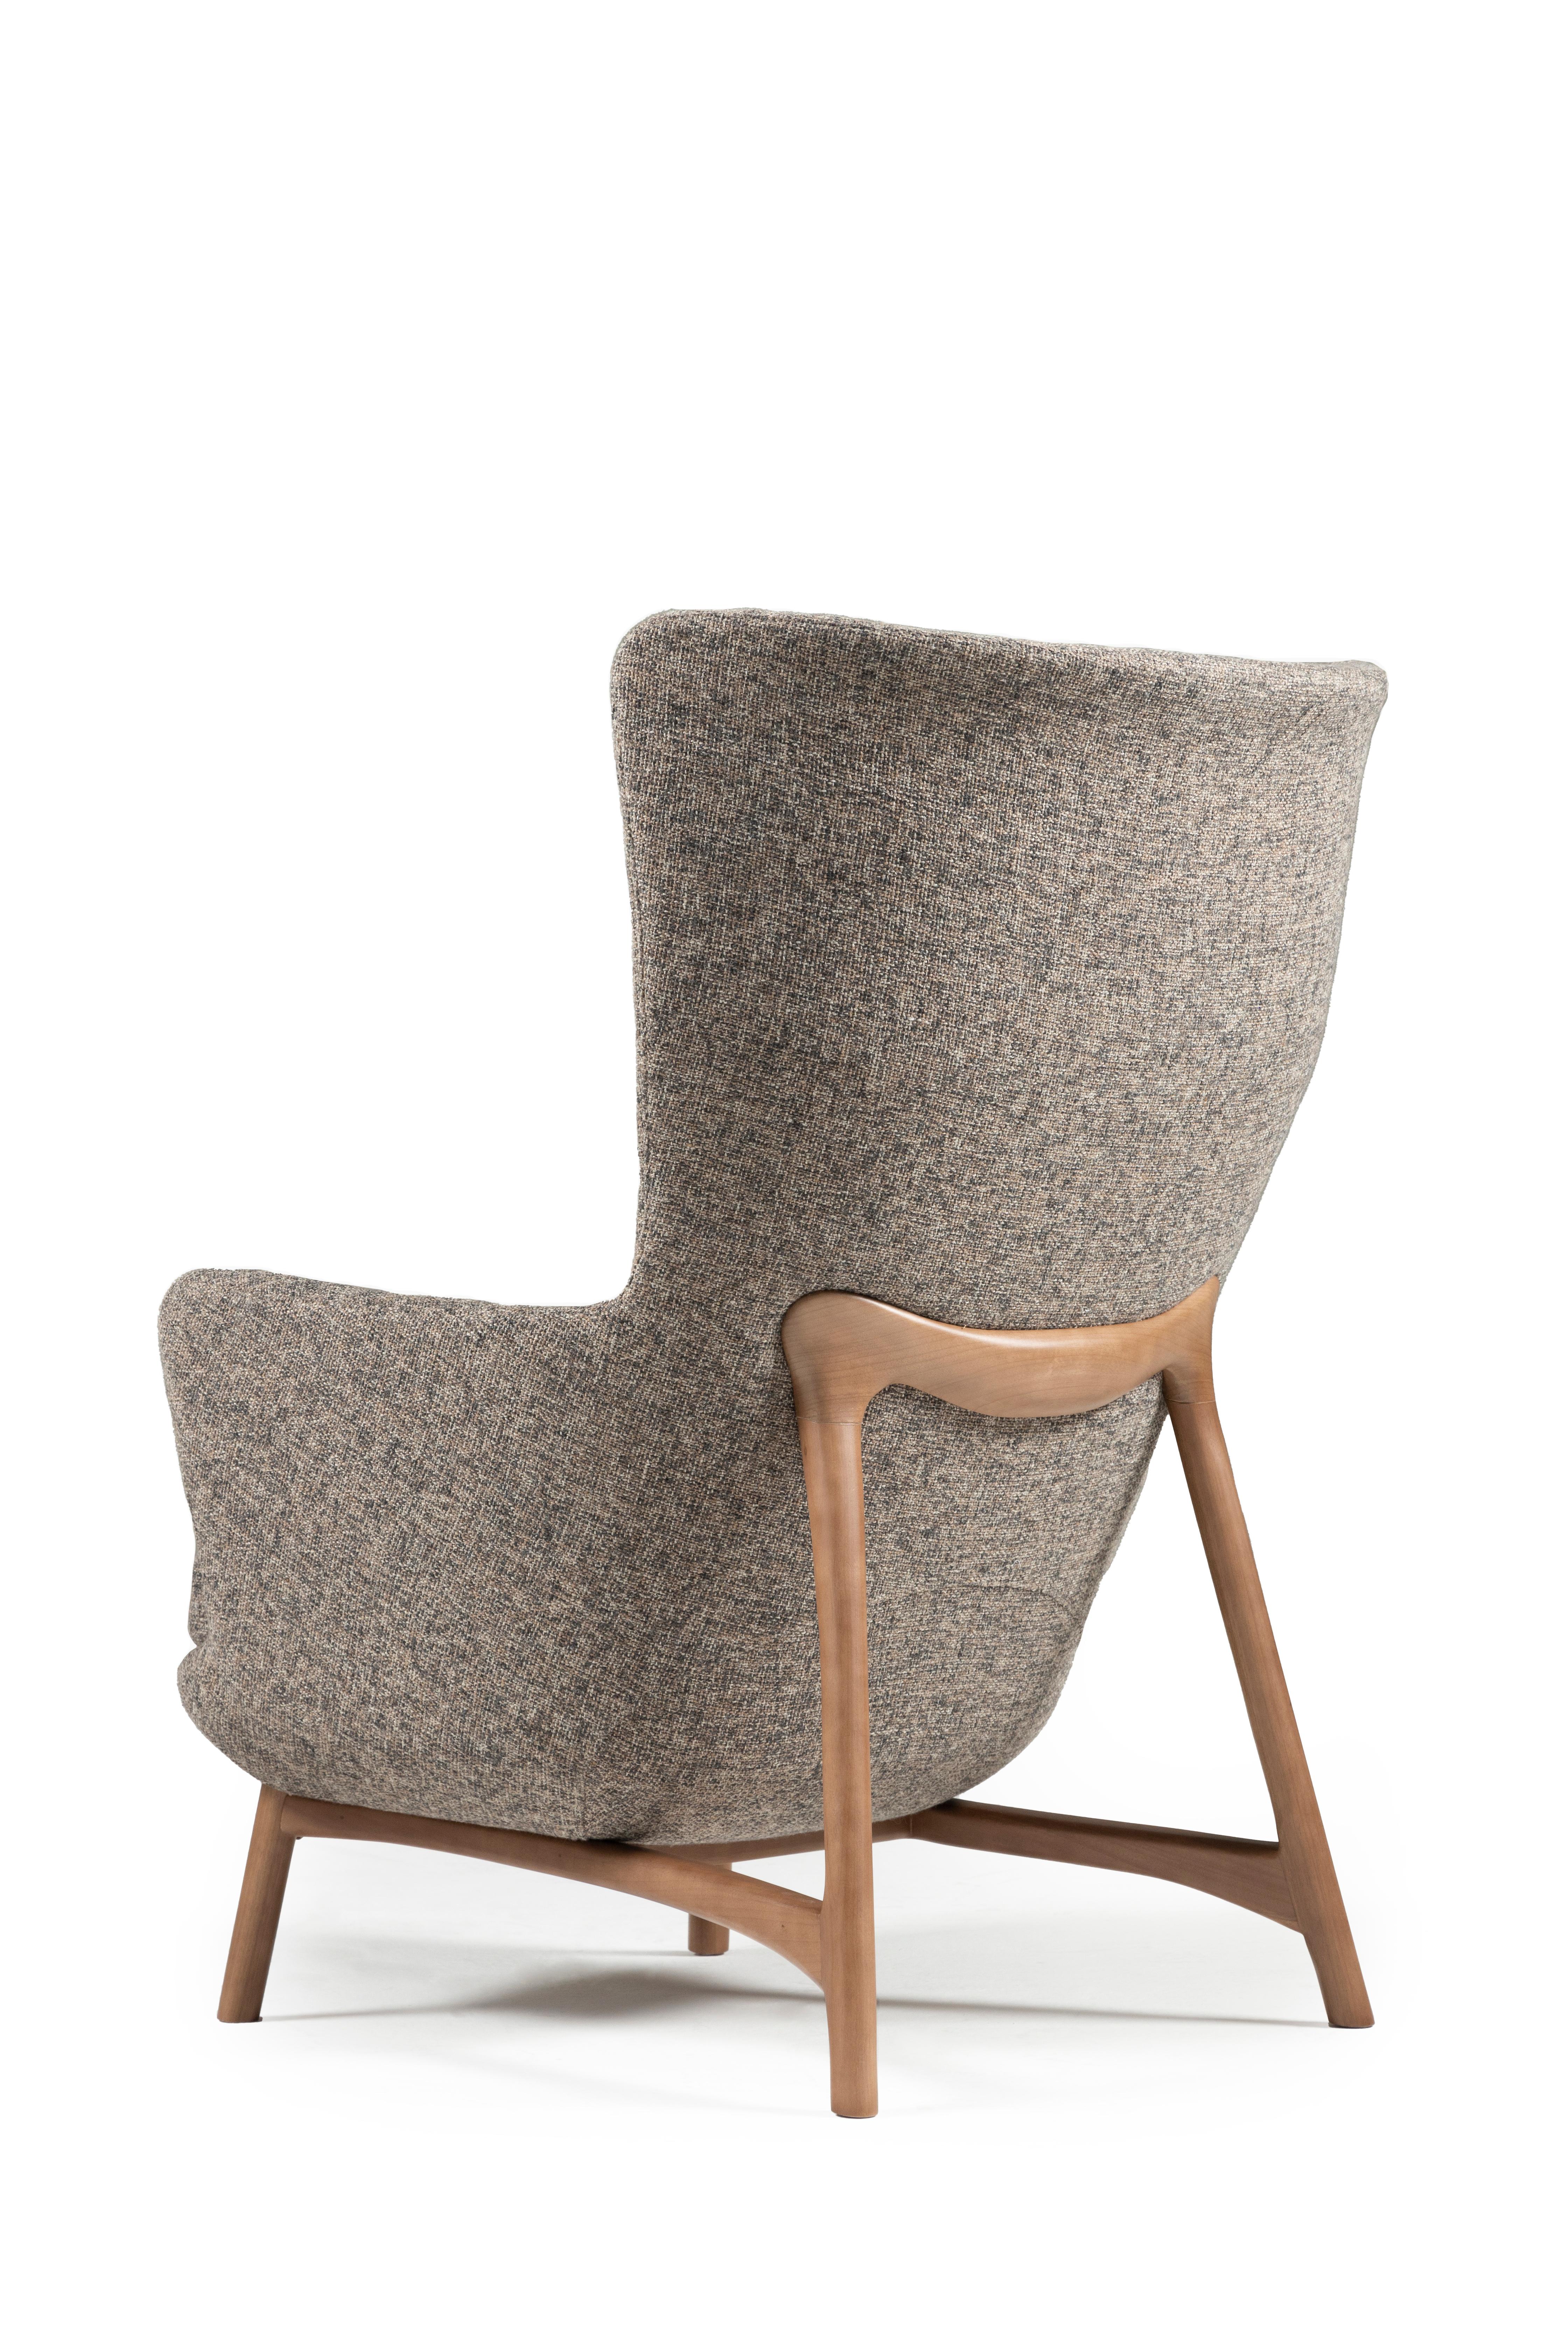 Sublime Sessel, Contemporary Style in Massivholz, Textilien Polsterung.  im Angebot 5